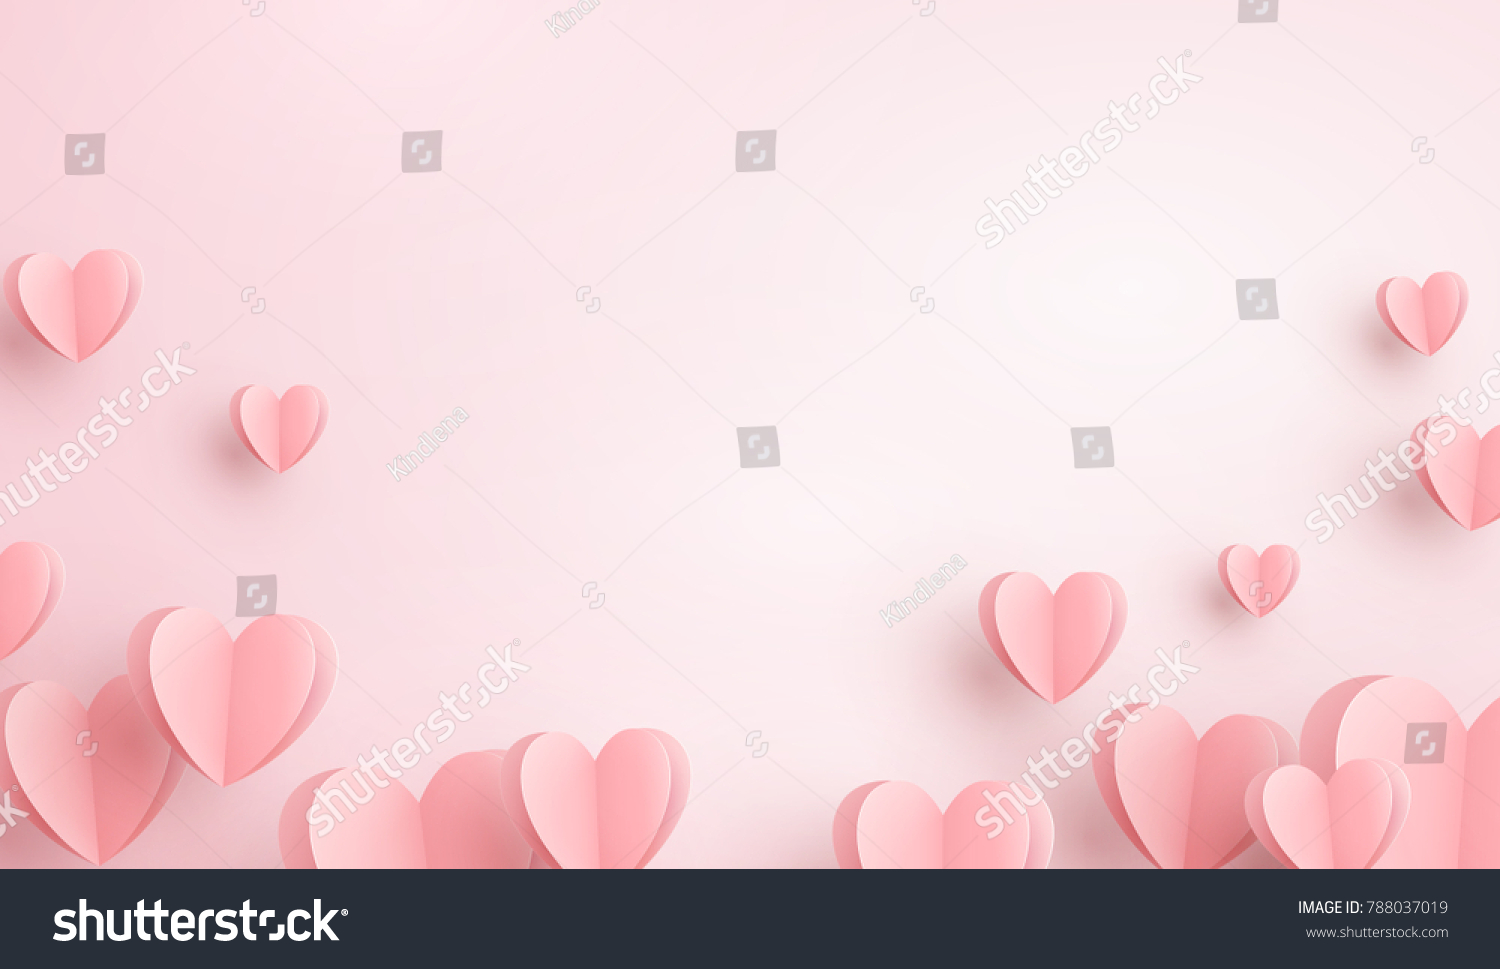 Paper elements in shape of heart flying on pink background. Vector symbols of love for Happy Women's, Mother's, Valentine's Day, birthday greeting card design. #788037019